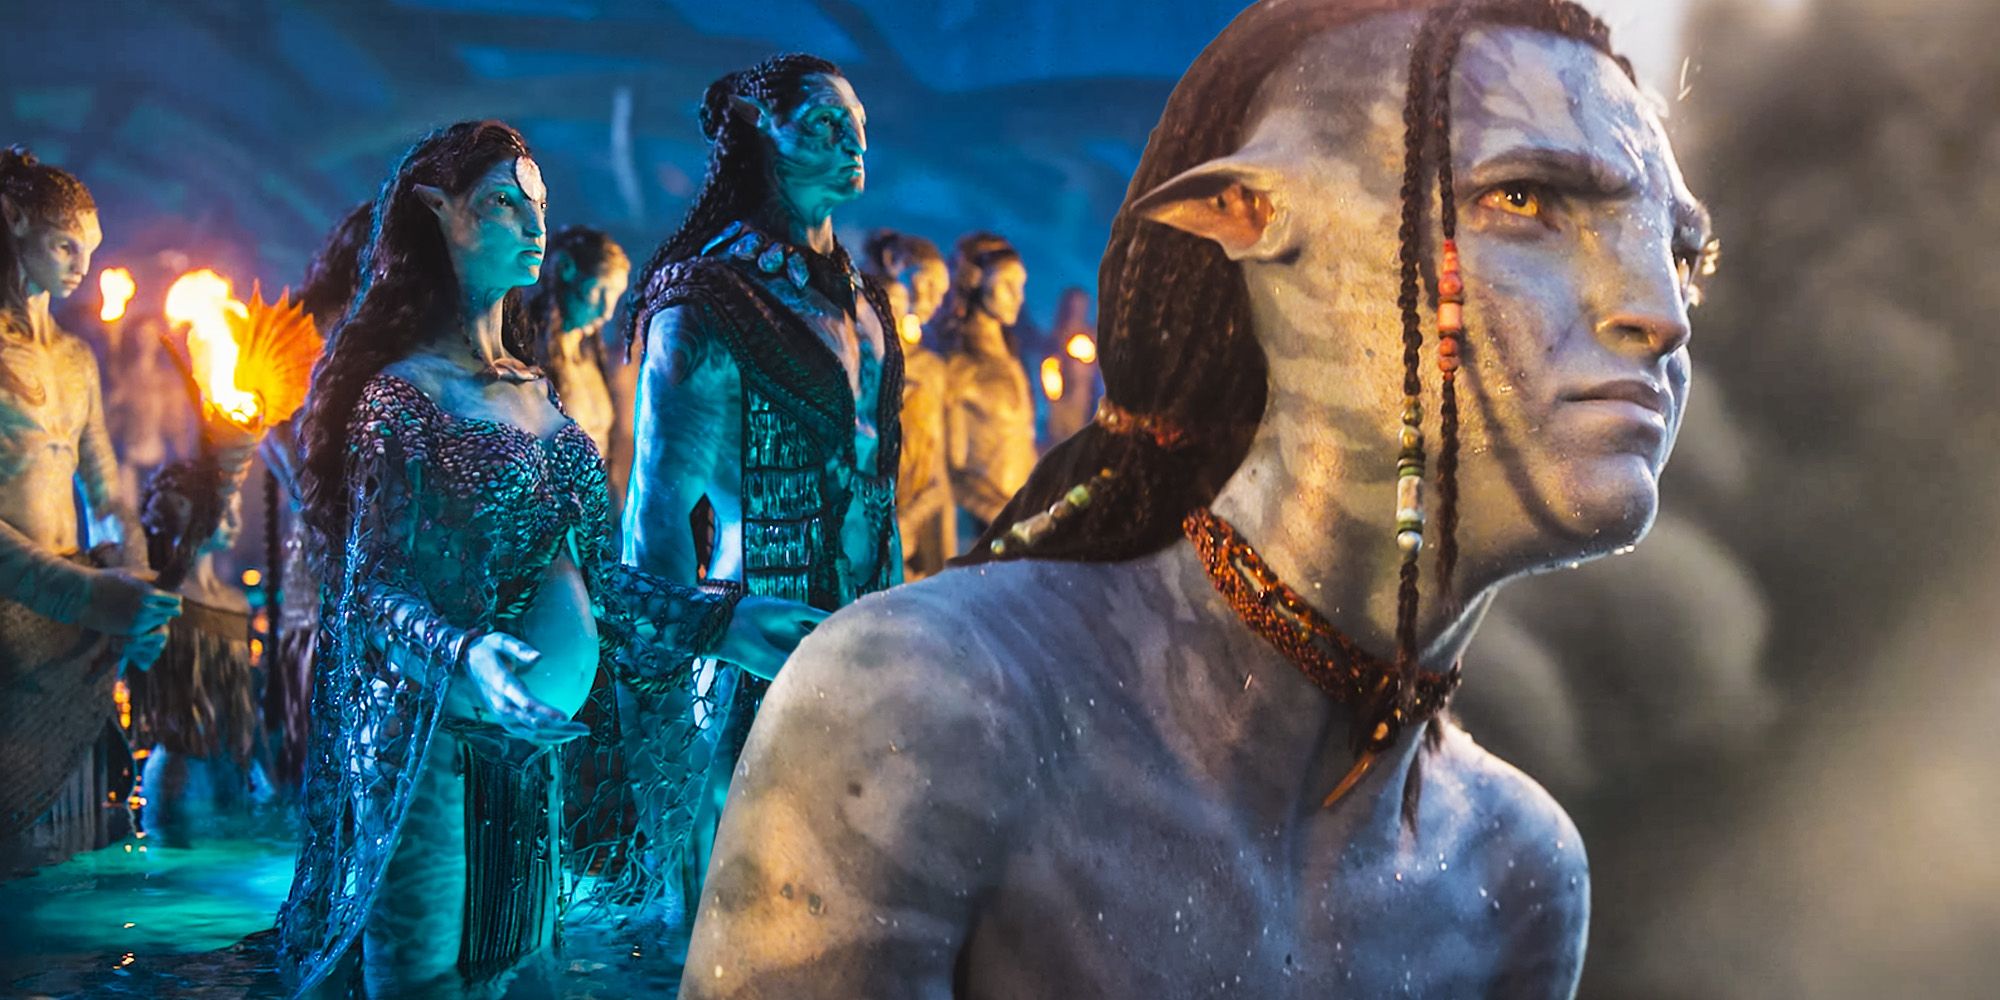 Why Everyone is Underestimating Avatar 2s Box Office Potential